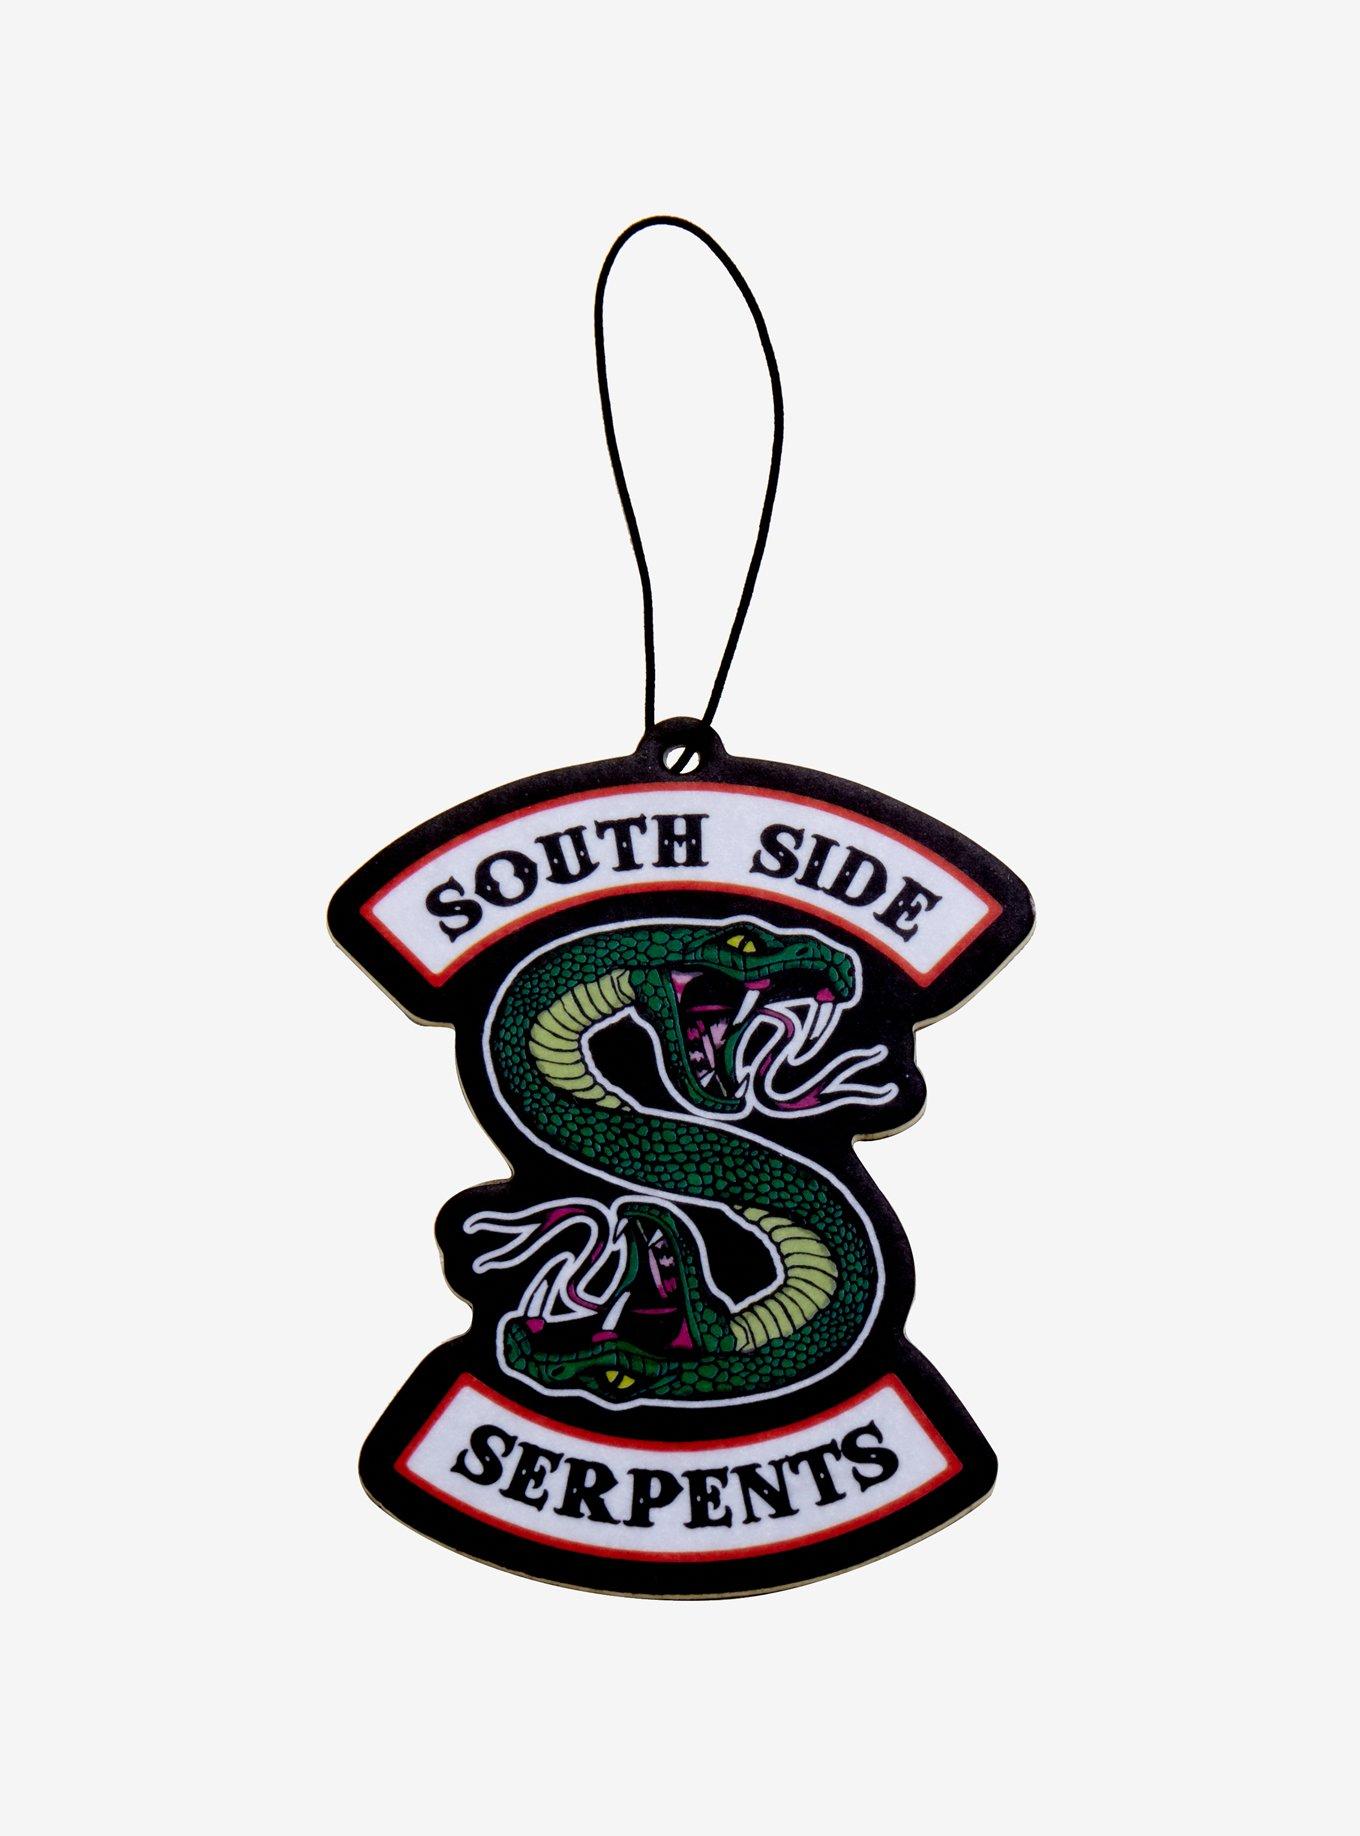 Riverdale Southside Serpents Air Freshener Hot Topic Exclusive, , alternate